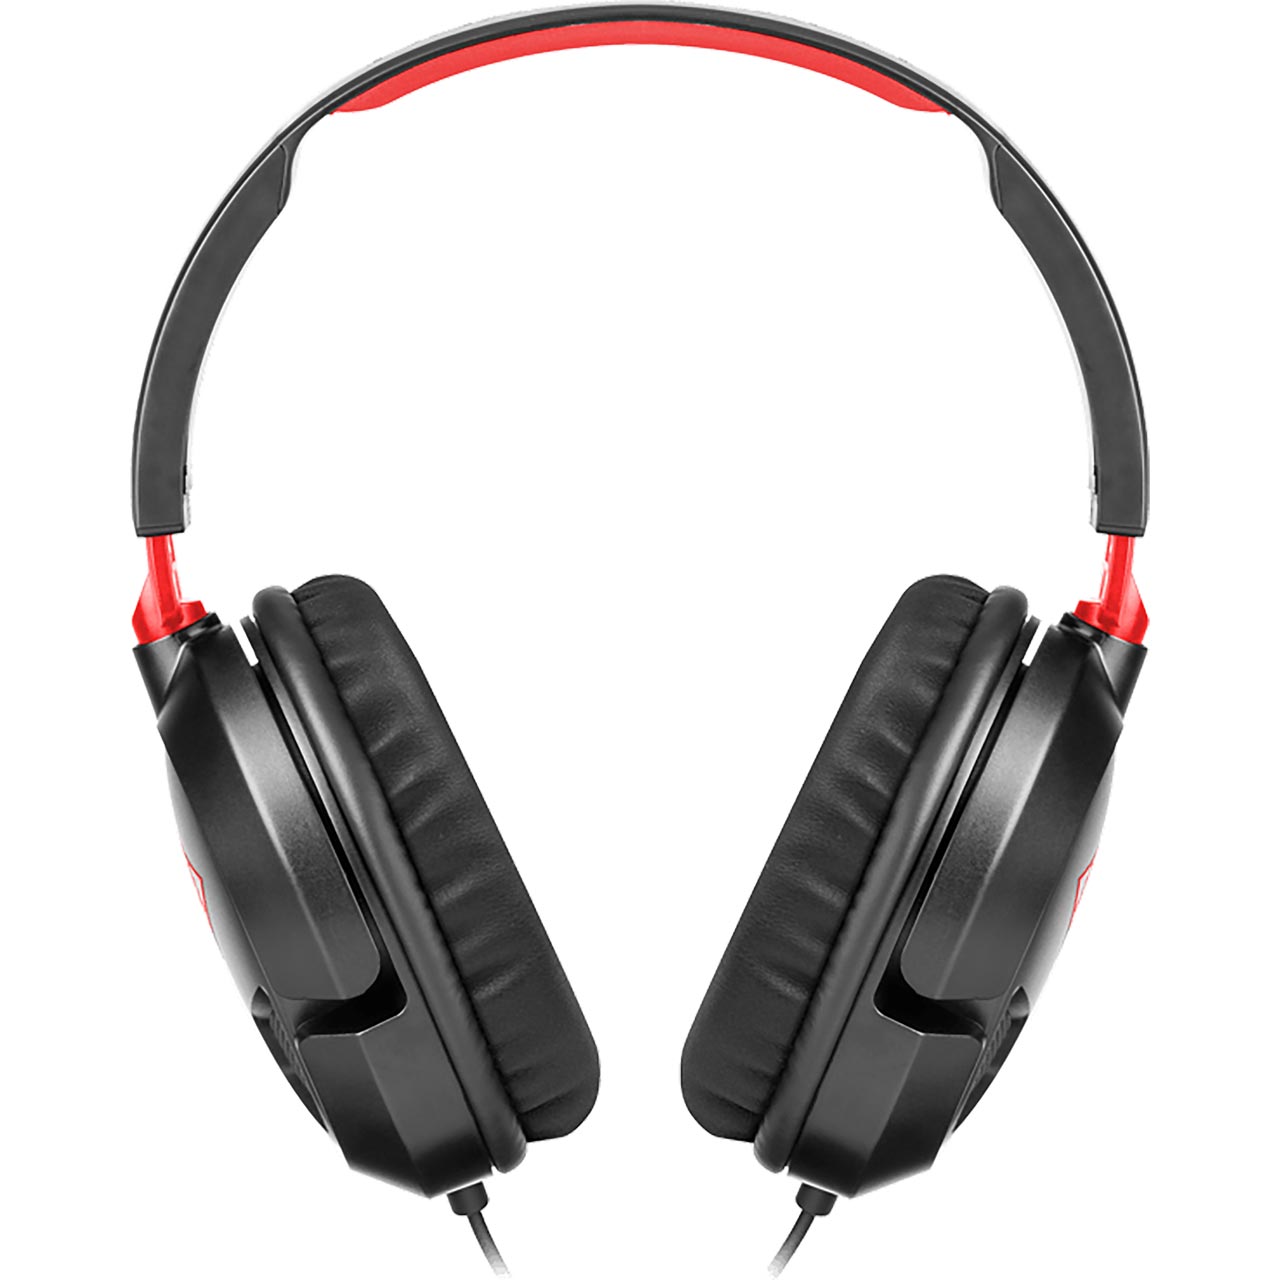 Turtle Beach Recon 50 Over Ear Gaming Headset Review